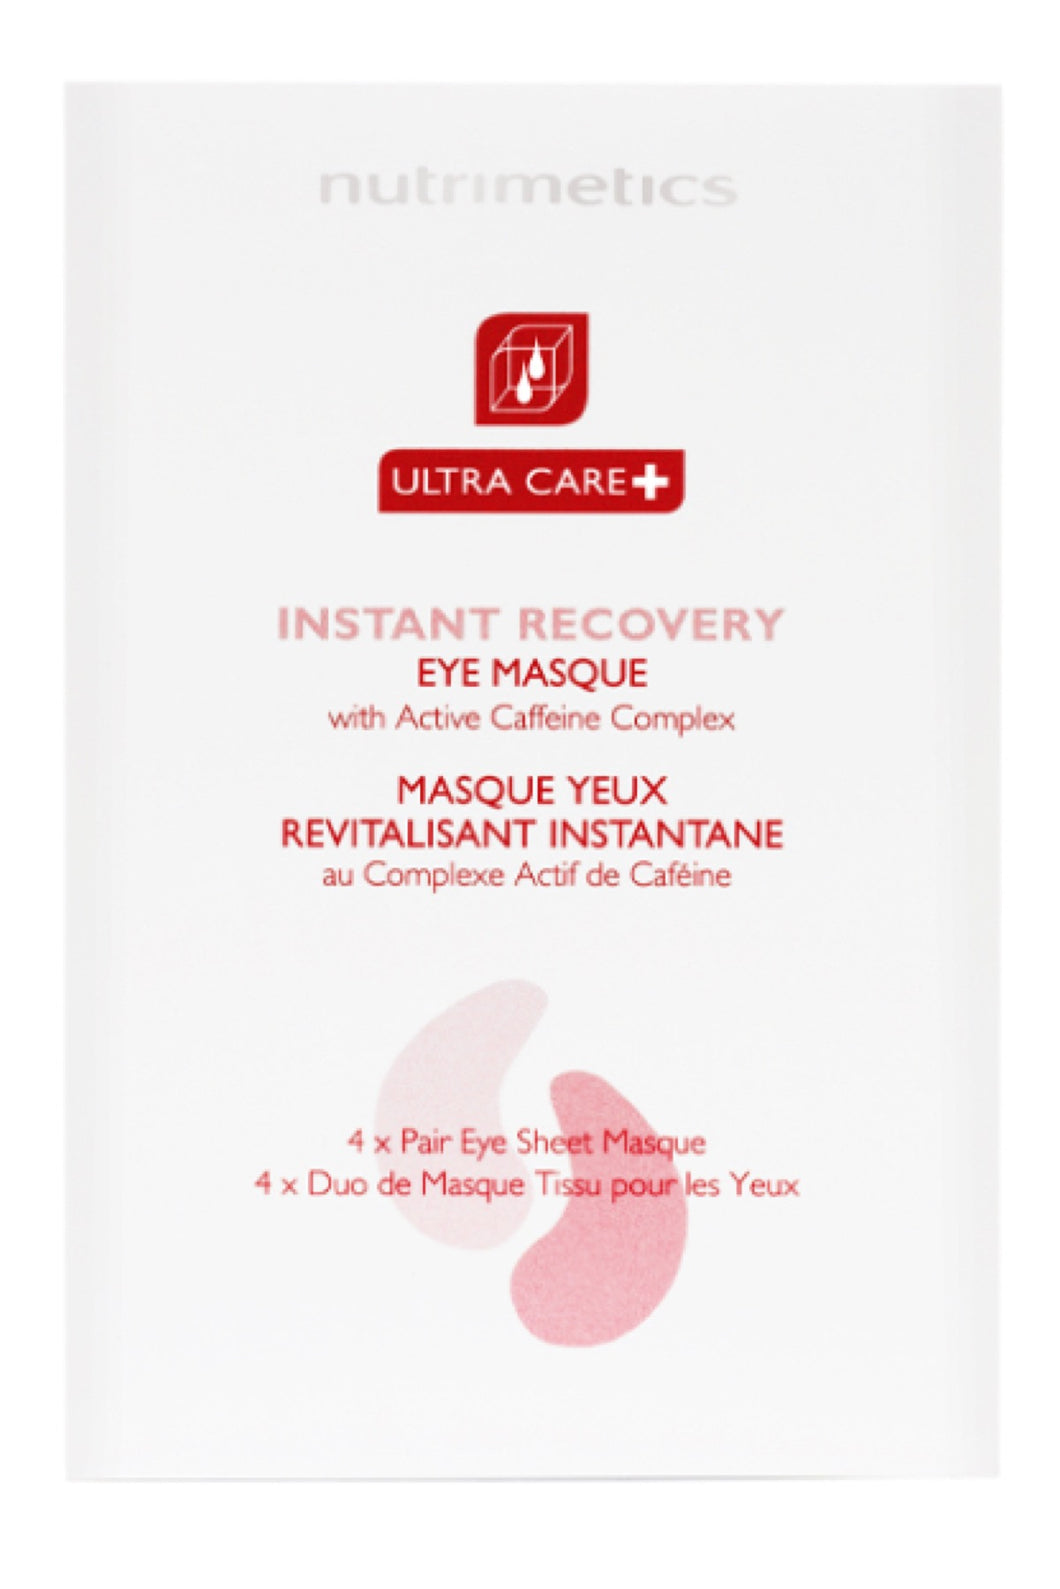 Ultra Care+ Instant Recovery Eye Masque 4 x pair eye sheet masques